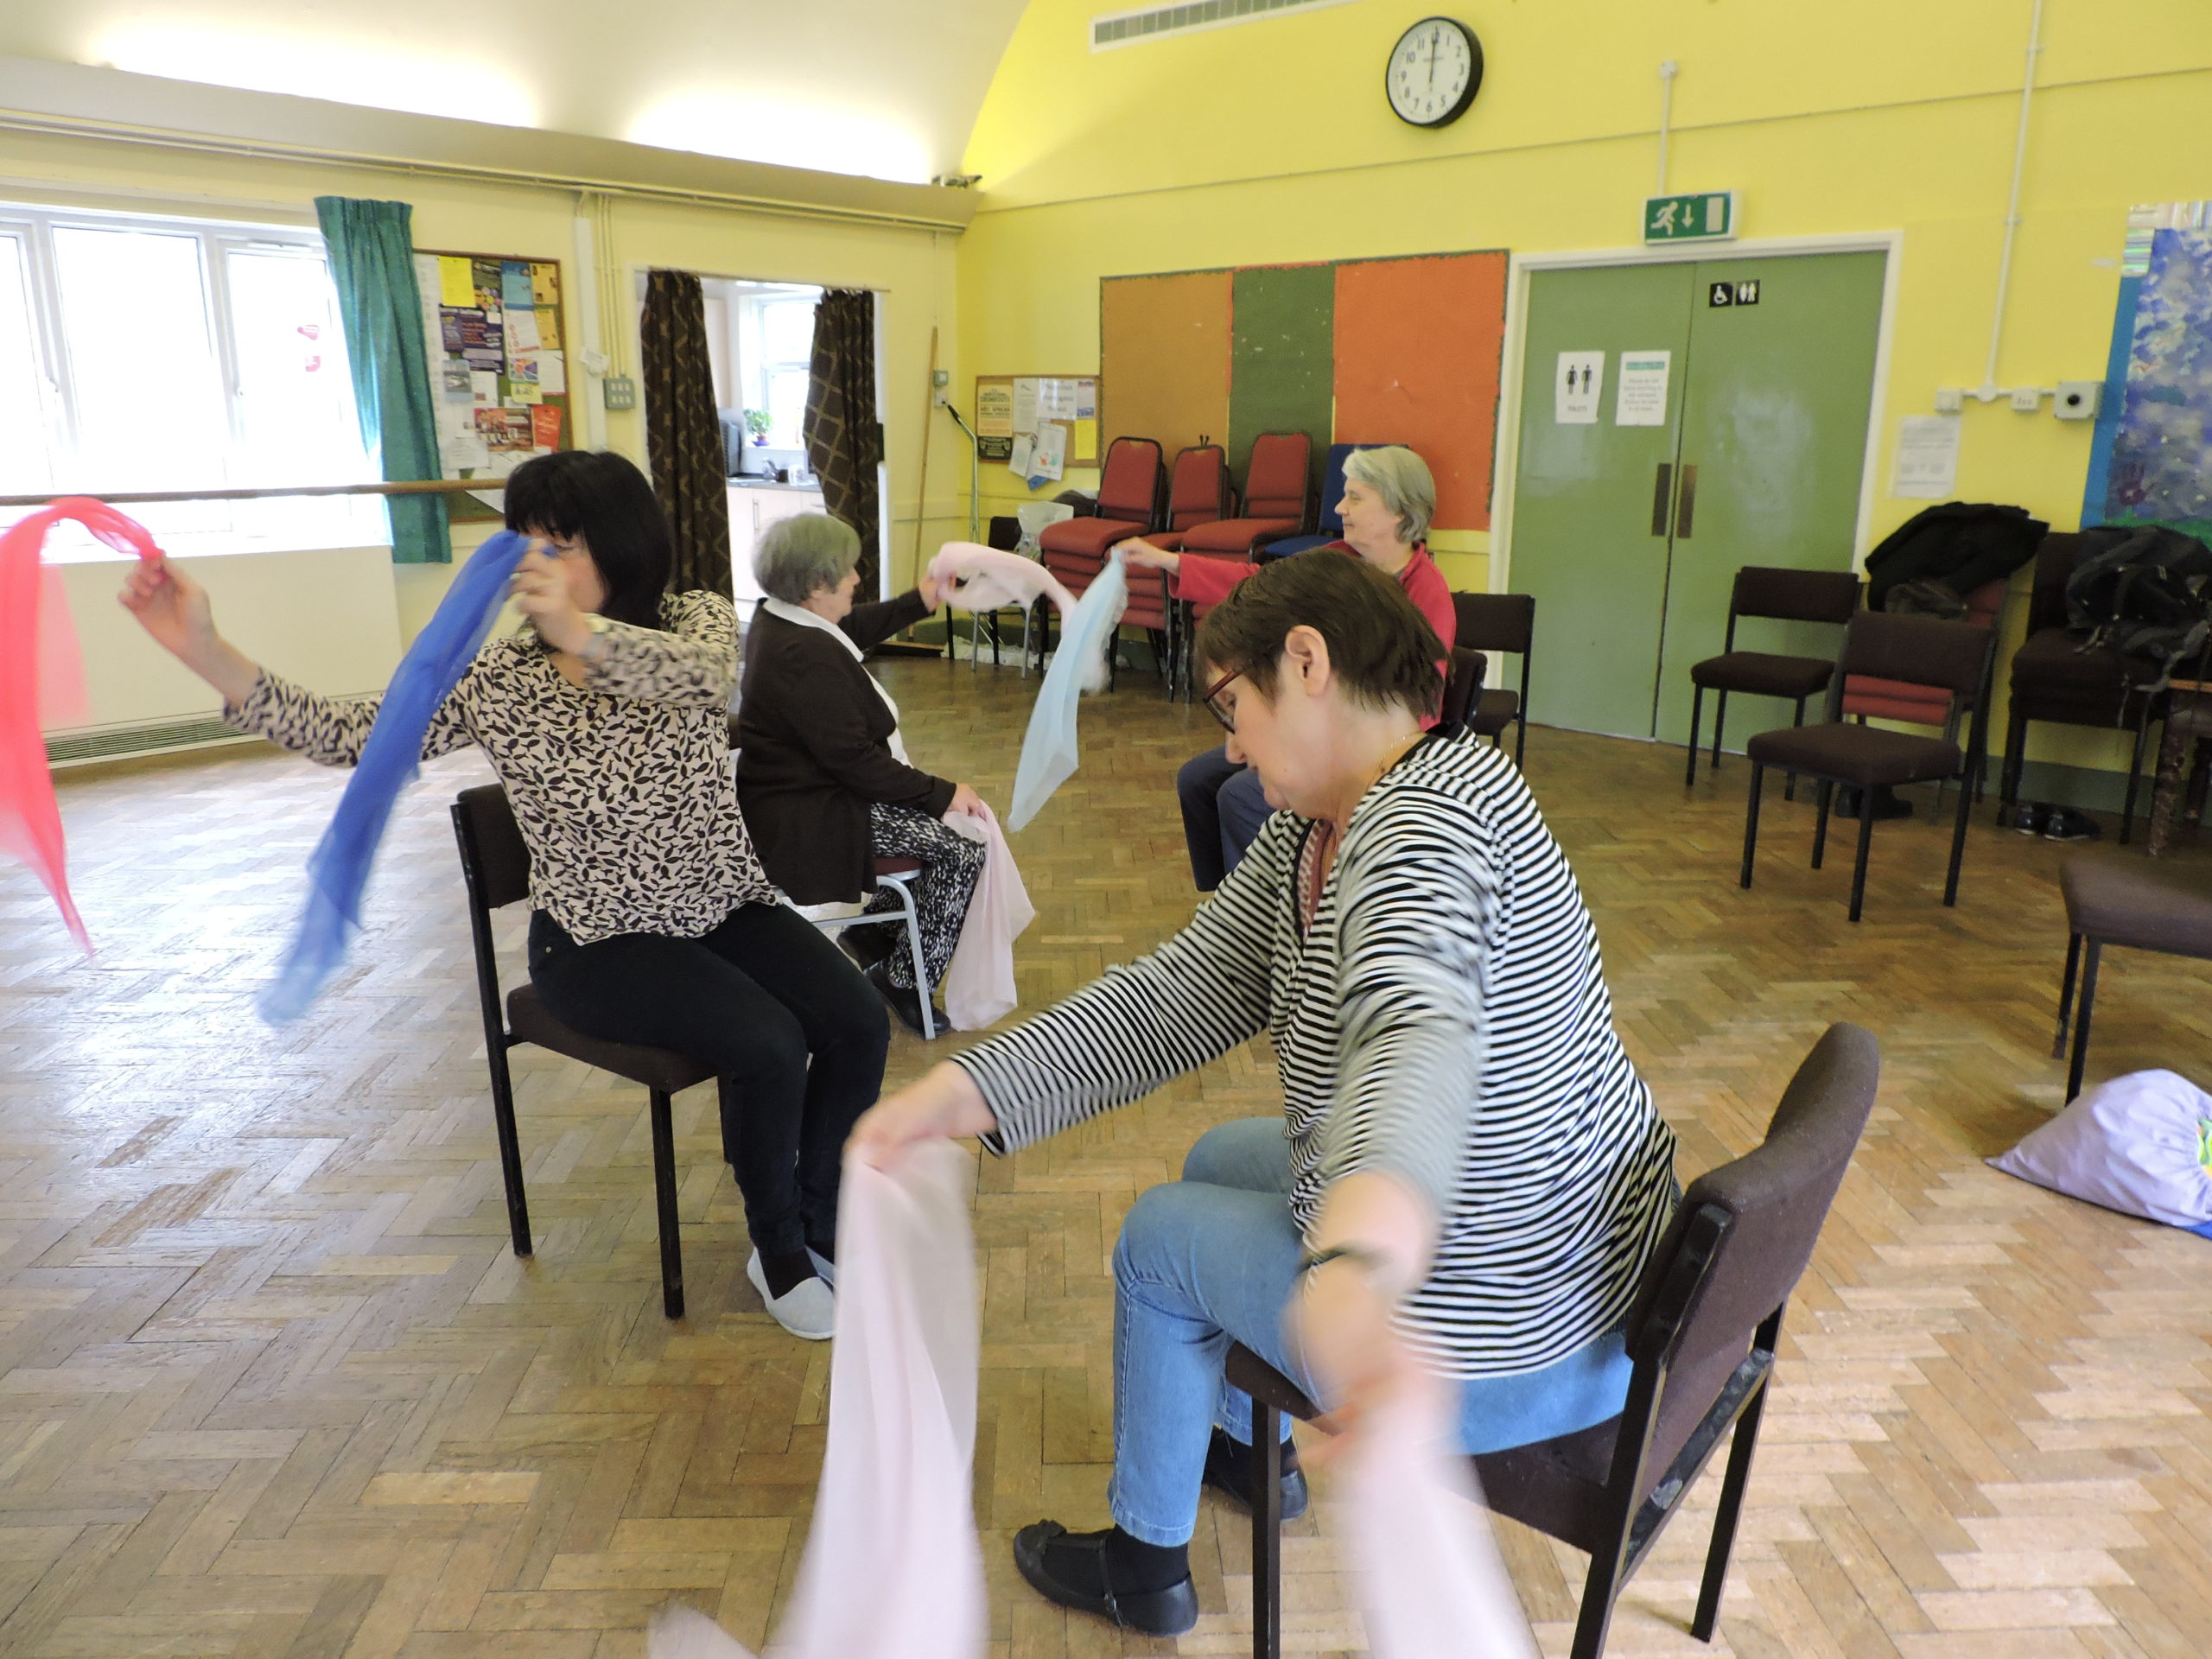 A group of people enjoy a chair dancing session.